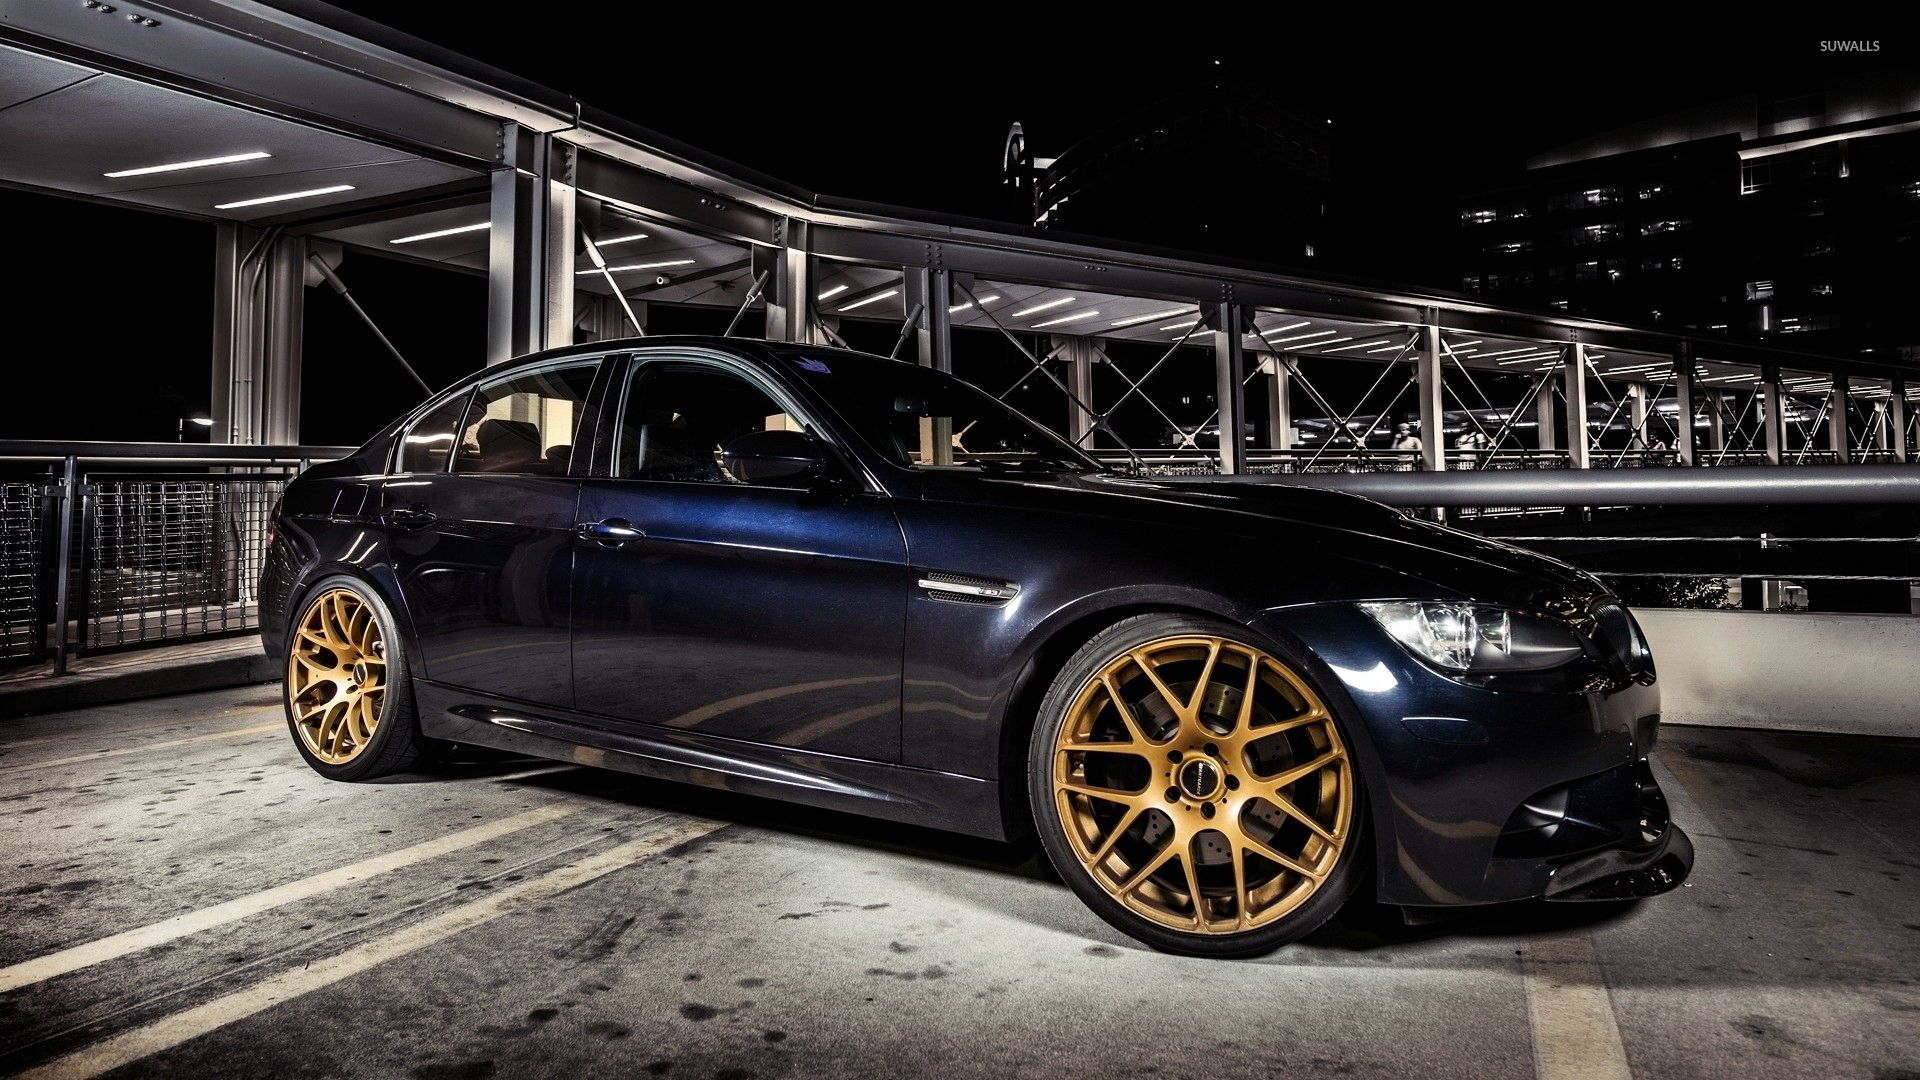 Golden rims on a BMW M3 with wallpaper wallpaper